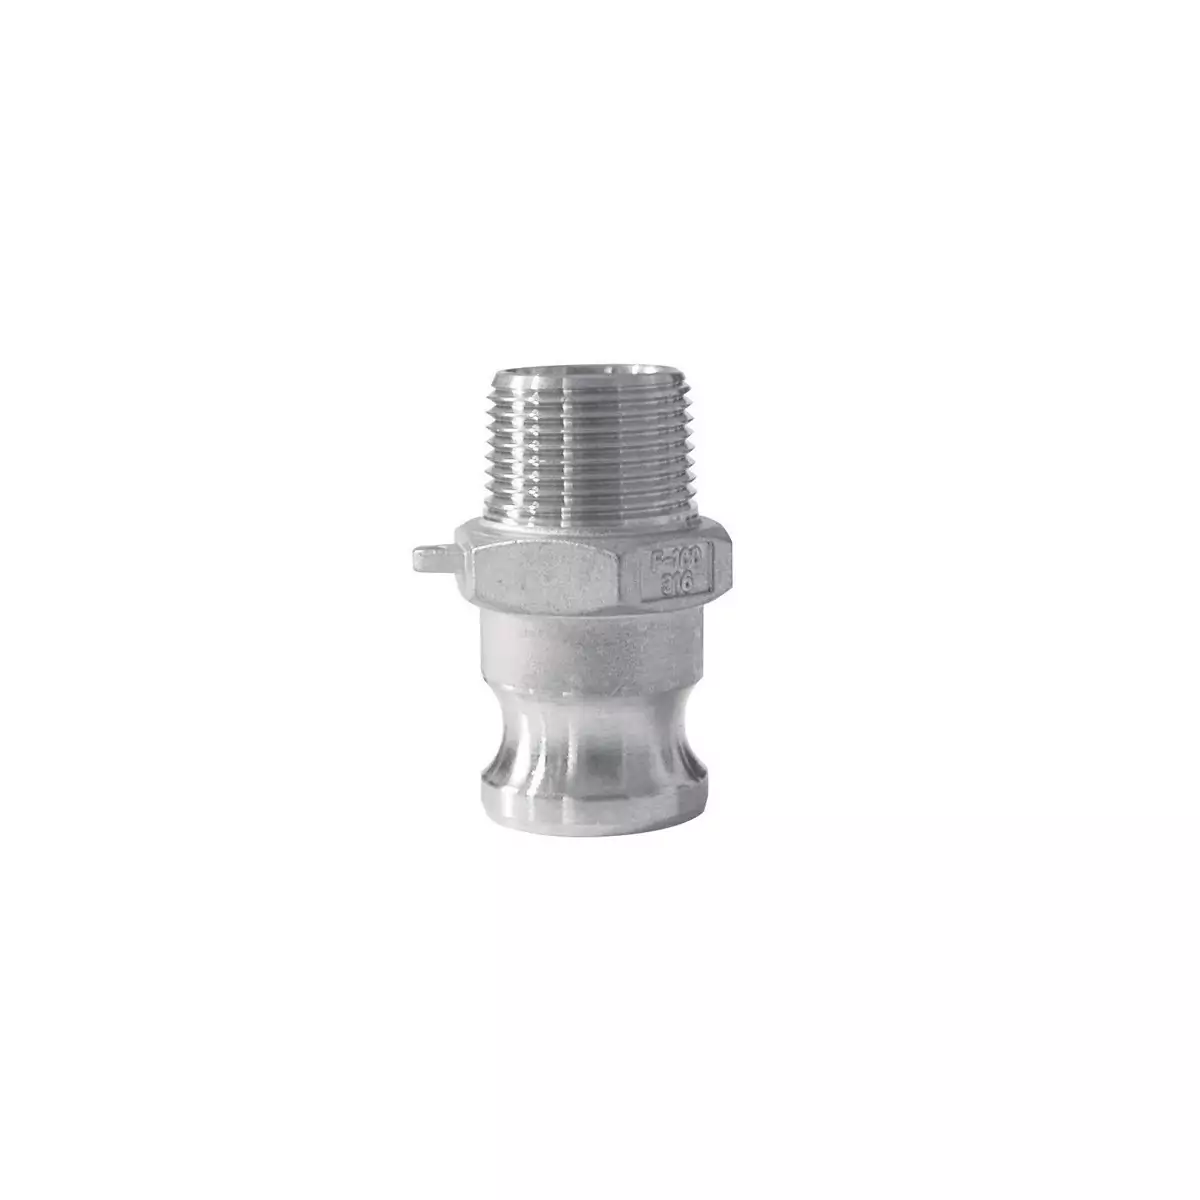 Male camlock coupling - male stainless steel threaded end - Type F